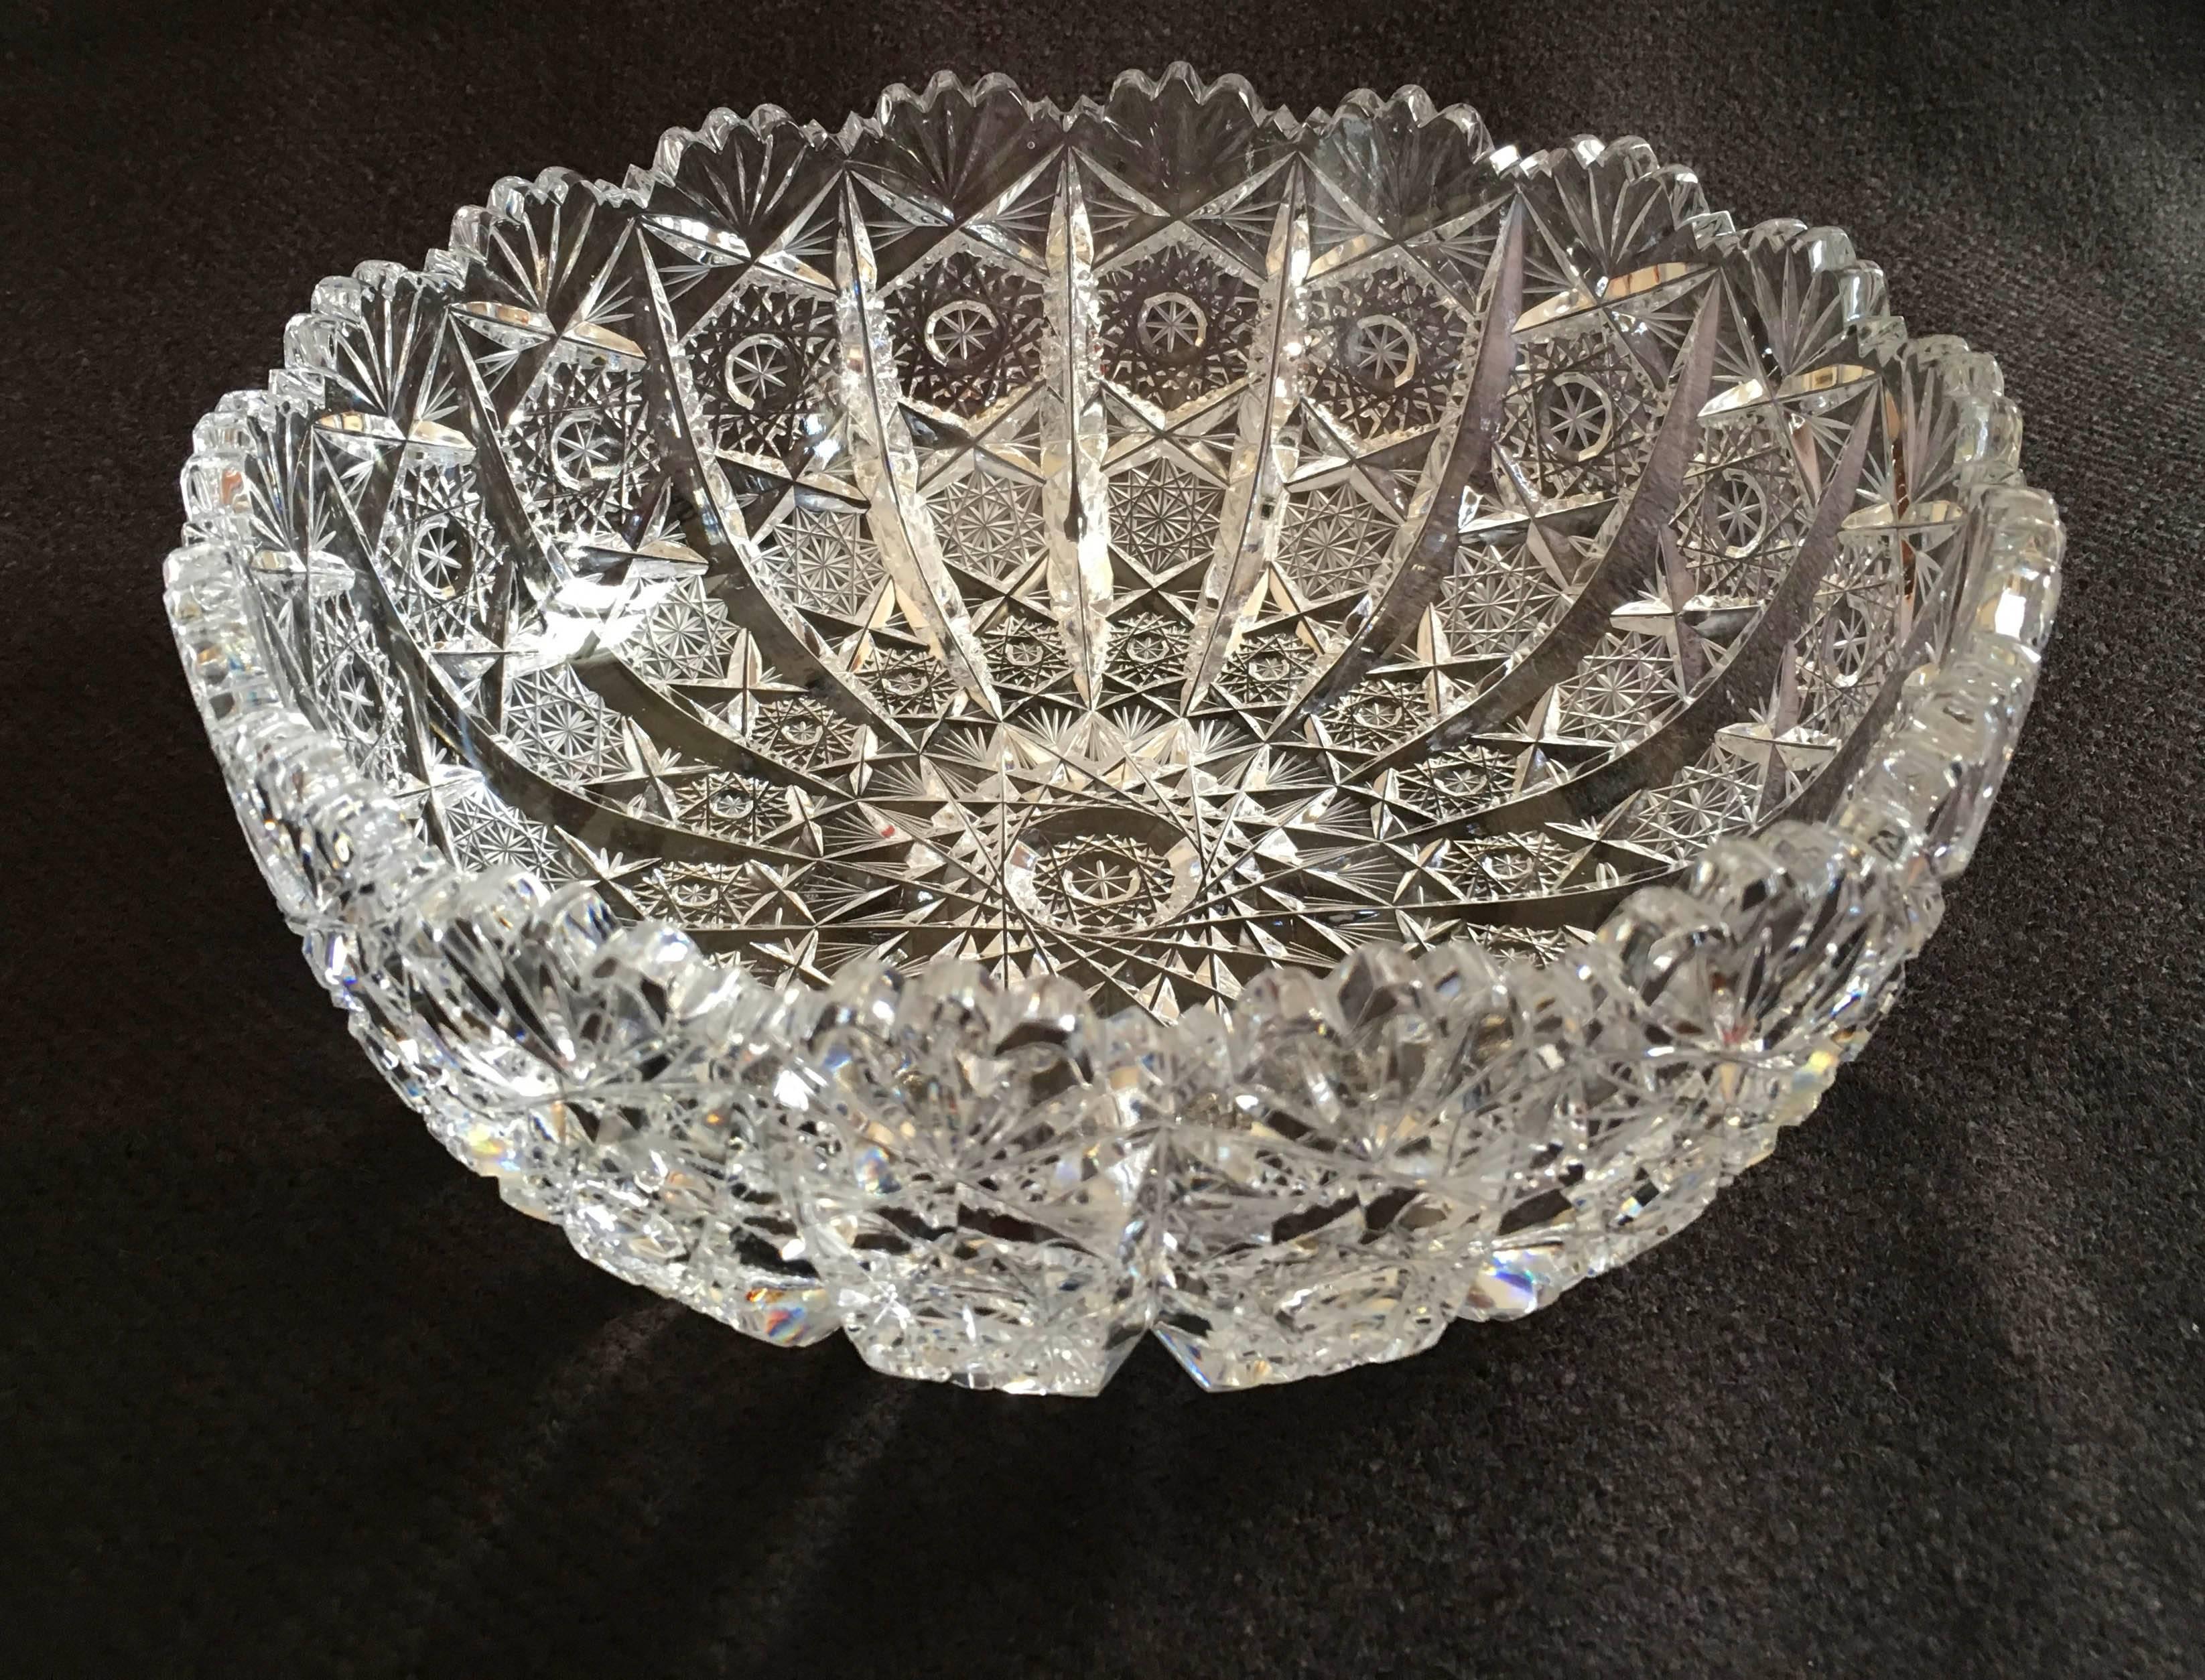 Extravagant cut and polished crystal bowl made circa the 1970s in one of the Bohemian glass works. The cutting is especially Fine and deep with the very intricate patterns. 